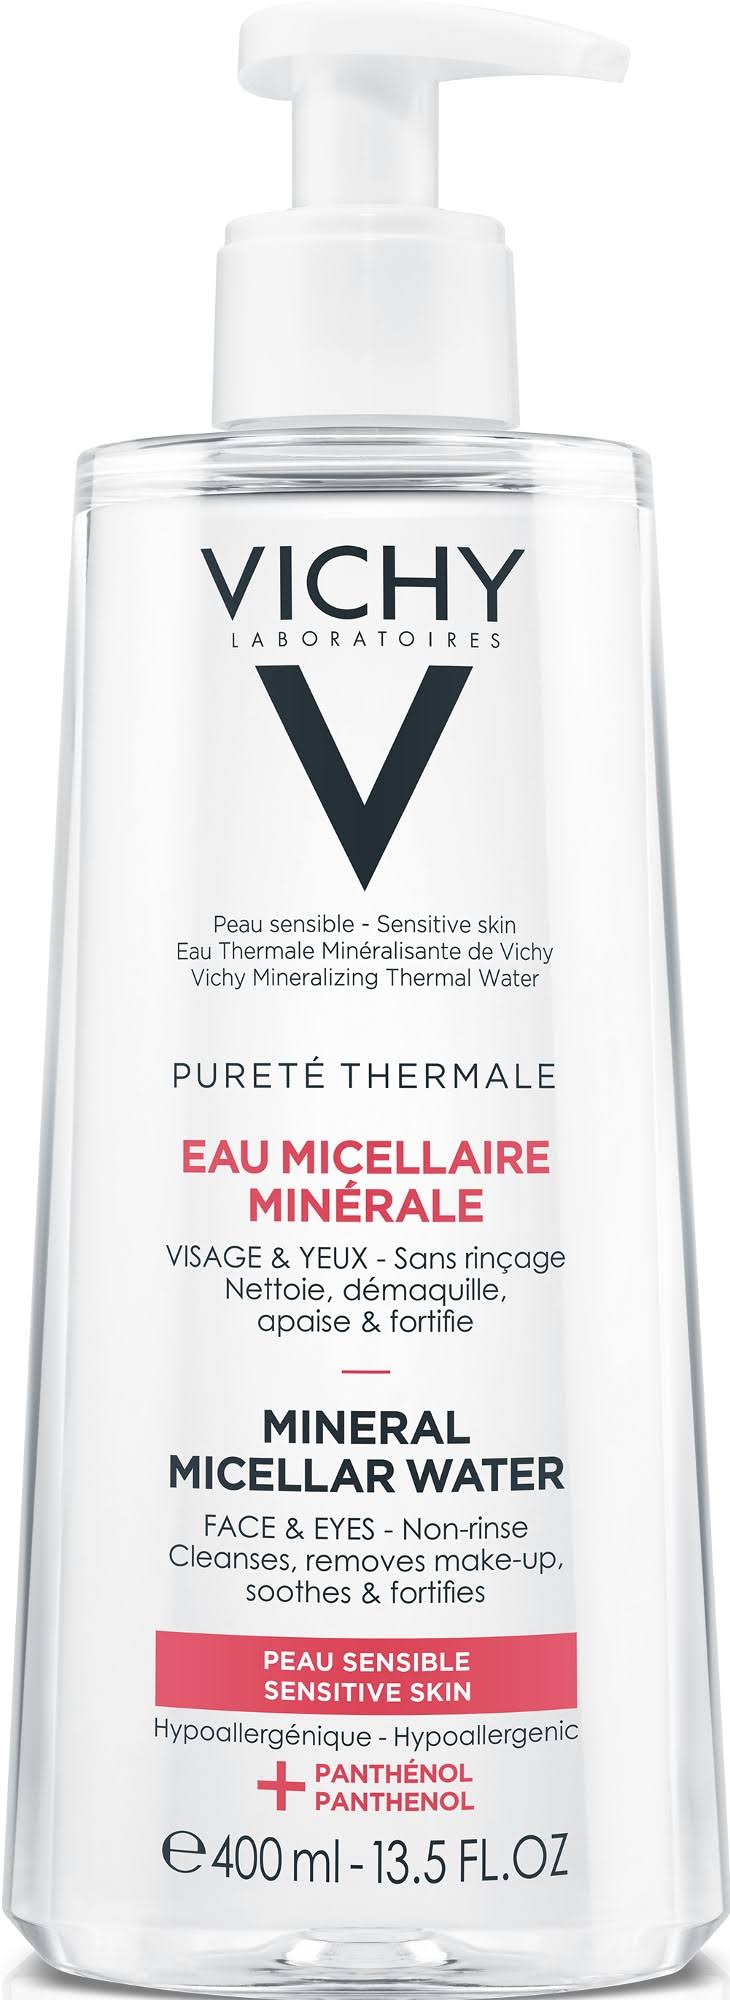 Vichy Purete Thermale Mineral Micellar Water for Sensitive Skin 400ml